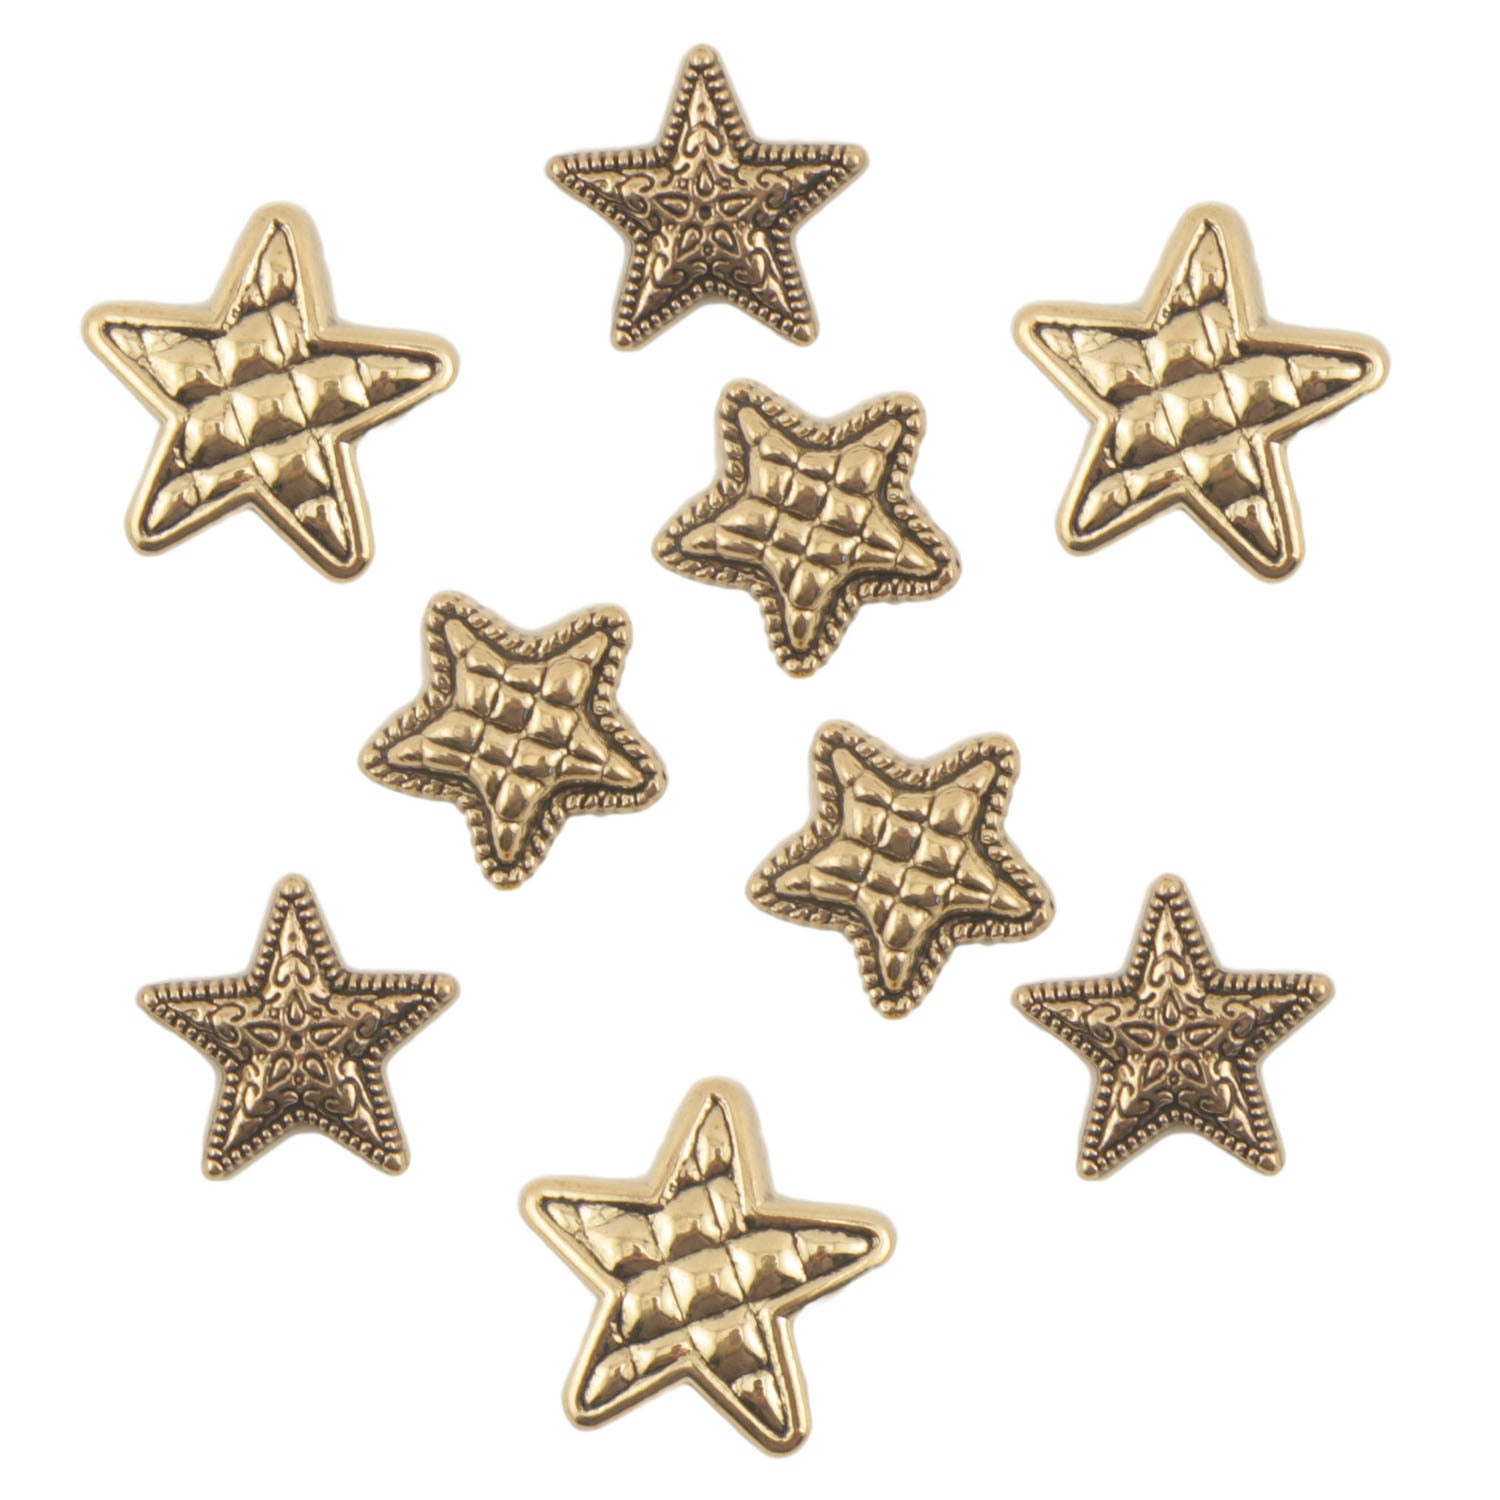 Gold Stars  Buttons Galore and More